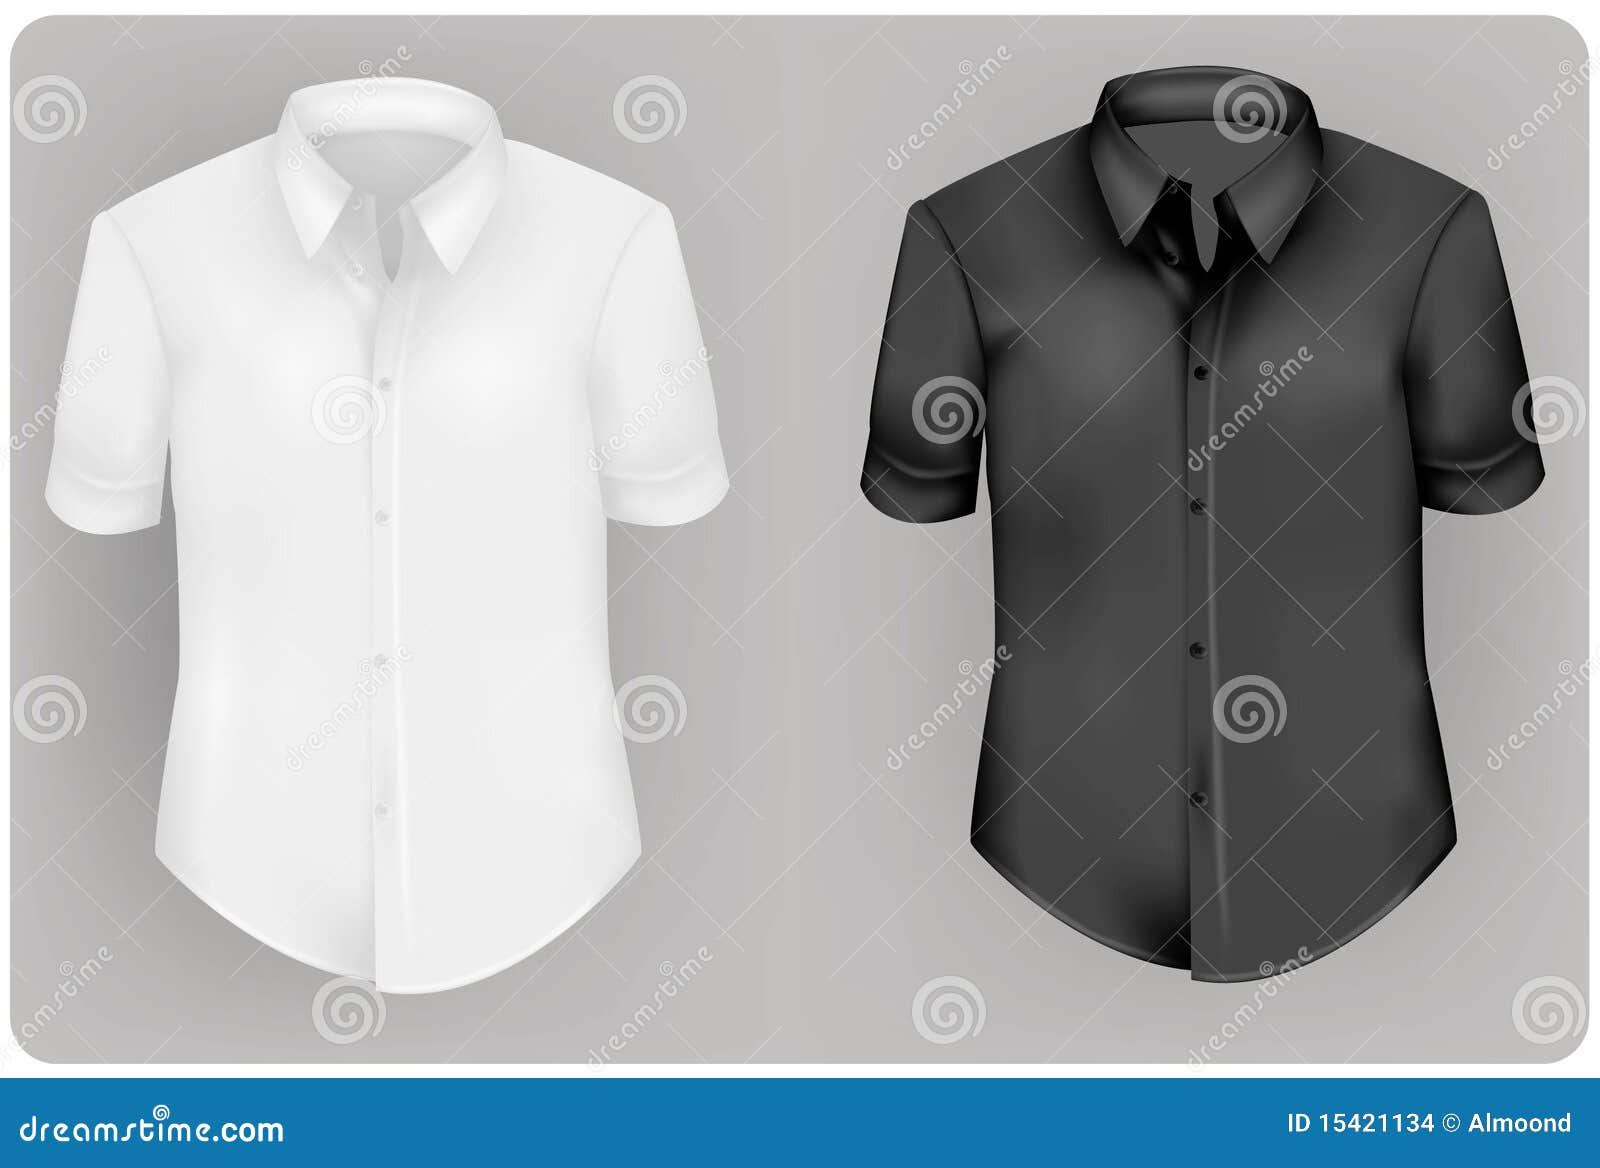 White And Black Polo Shirts. Stock Images - Image: 15421134